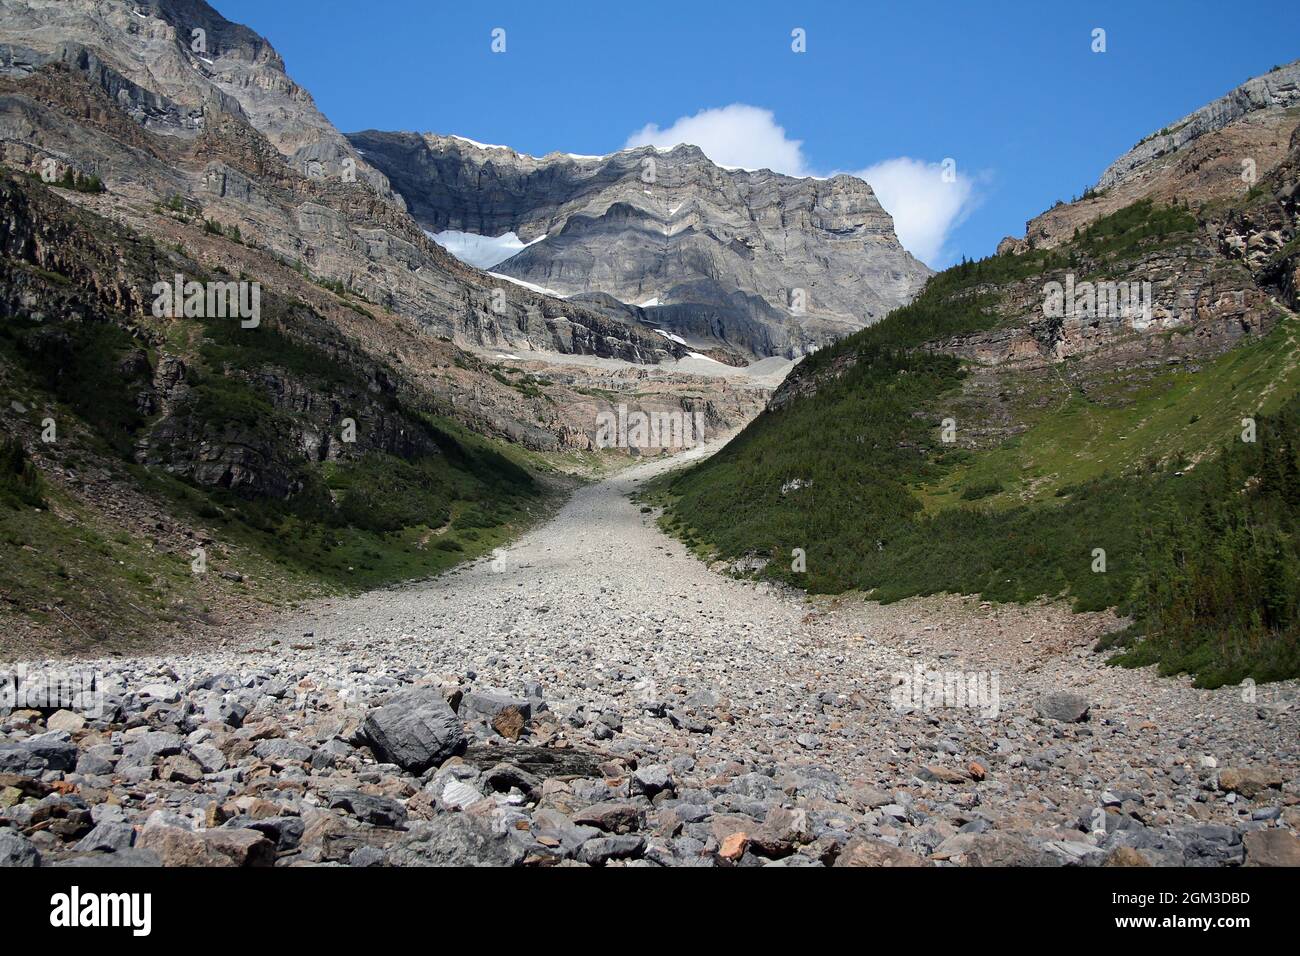 The rocky route to the top of the valley and the peak of the mountains in Canada Stock Photo